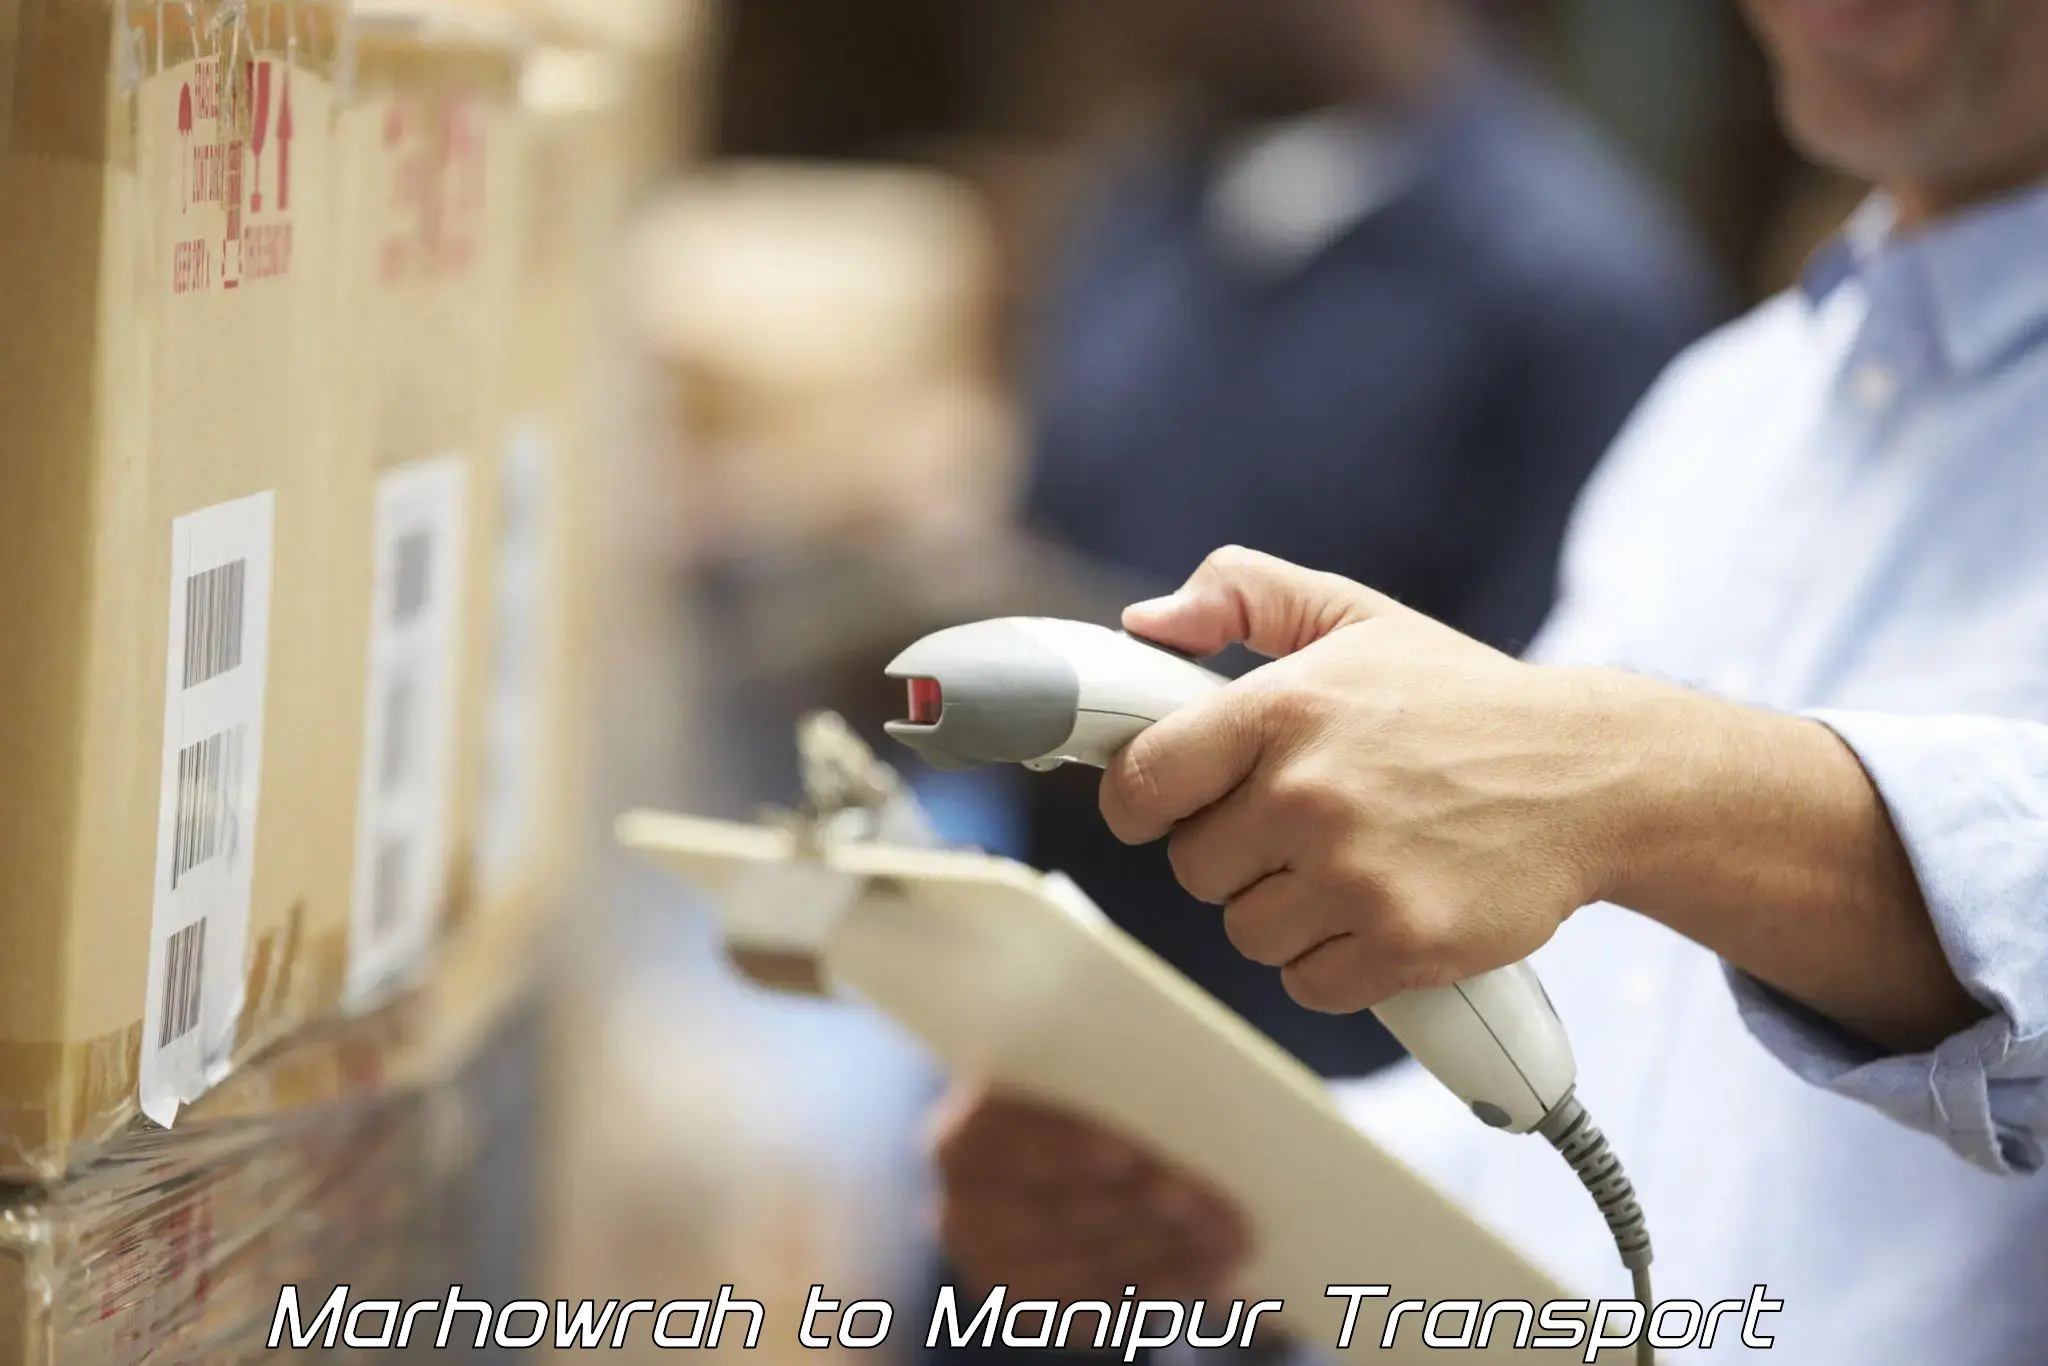 Delivery service Marhowrah to Chandel